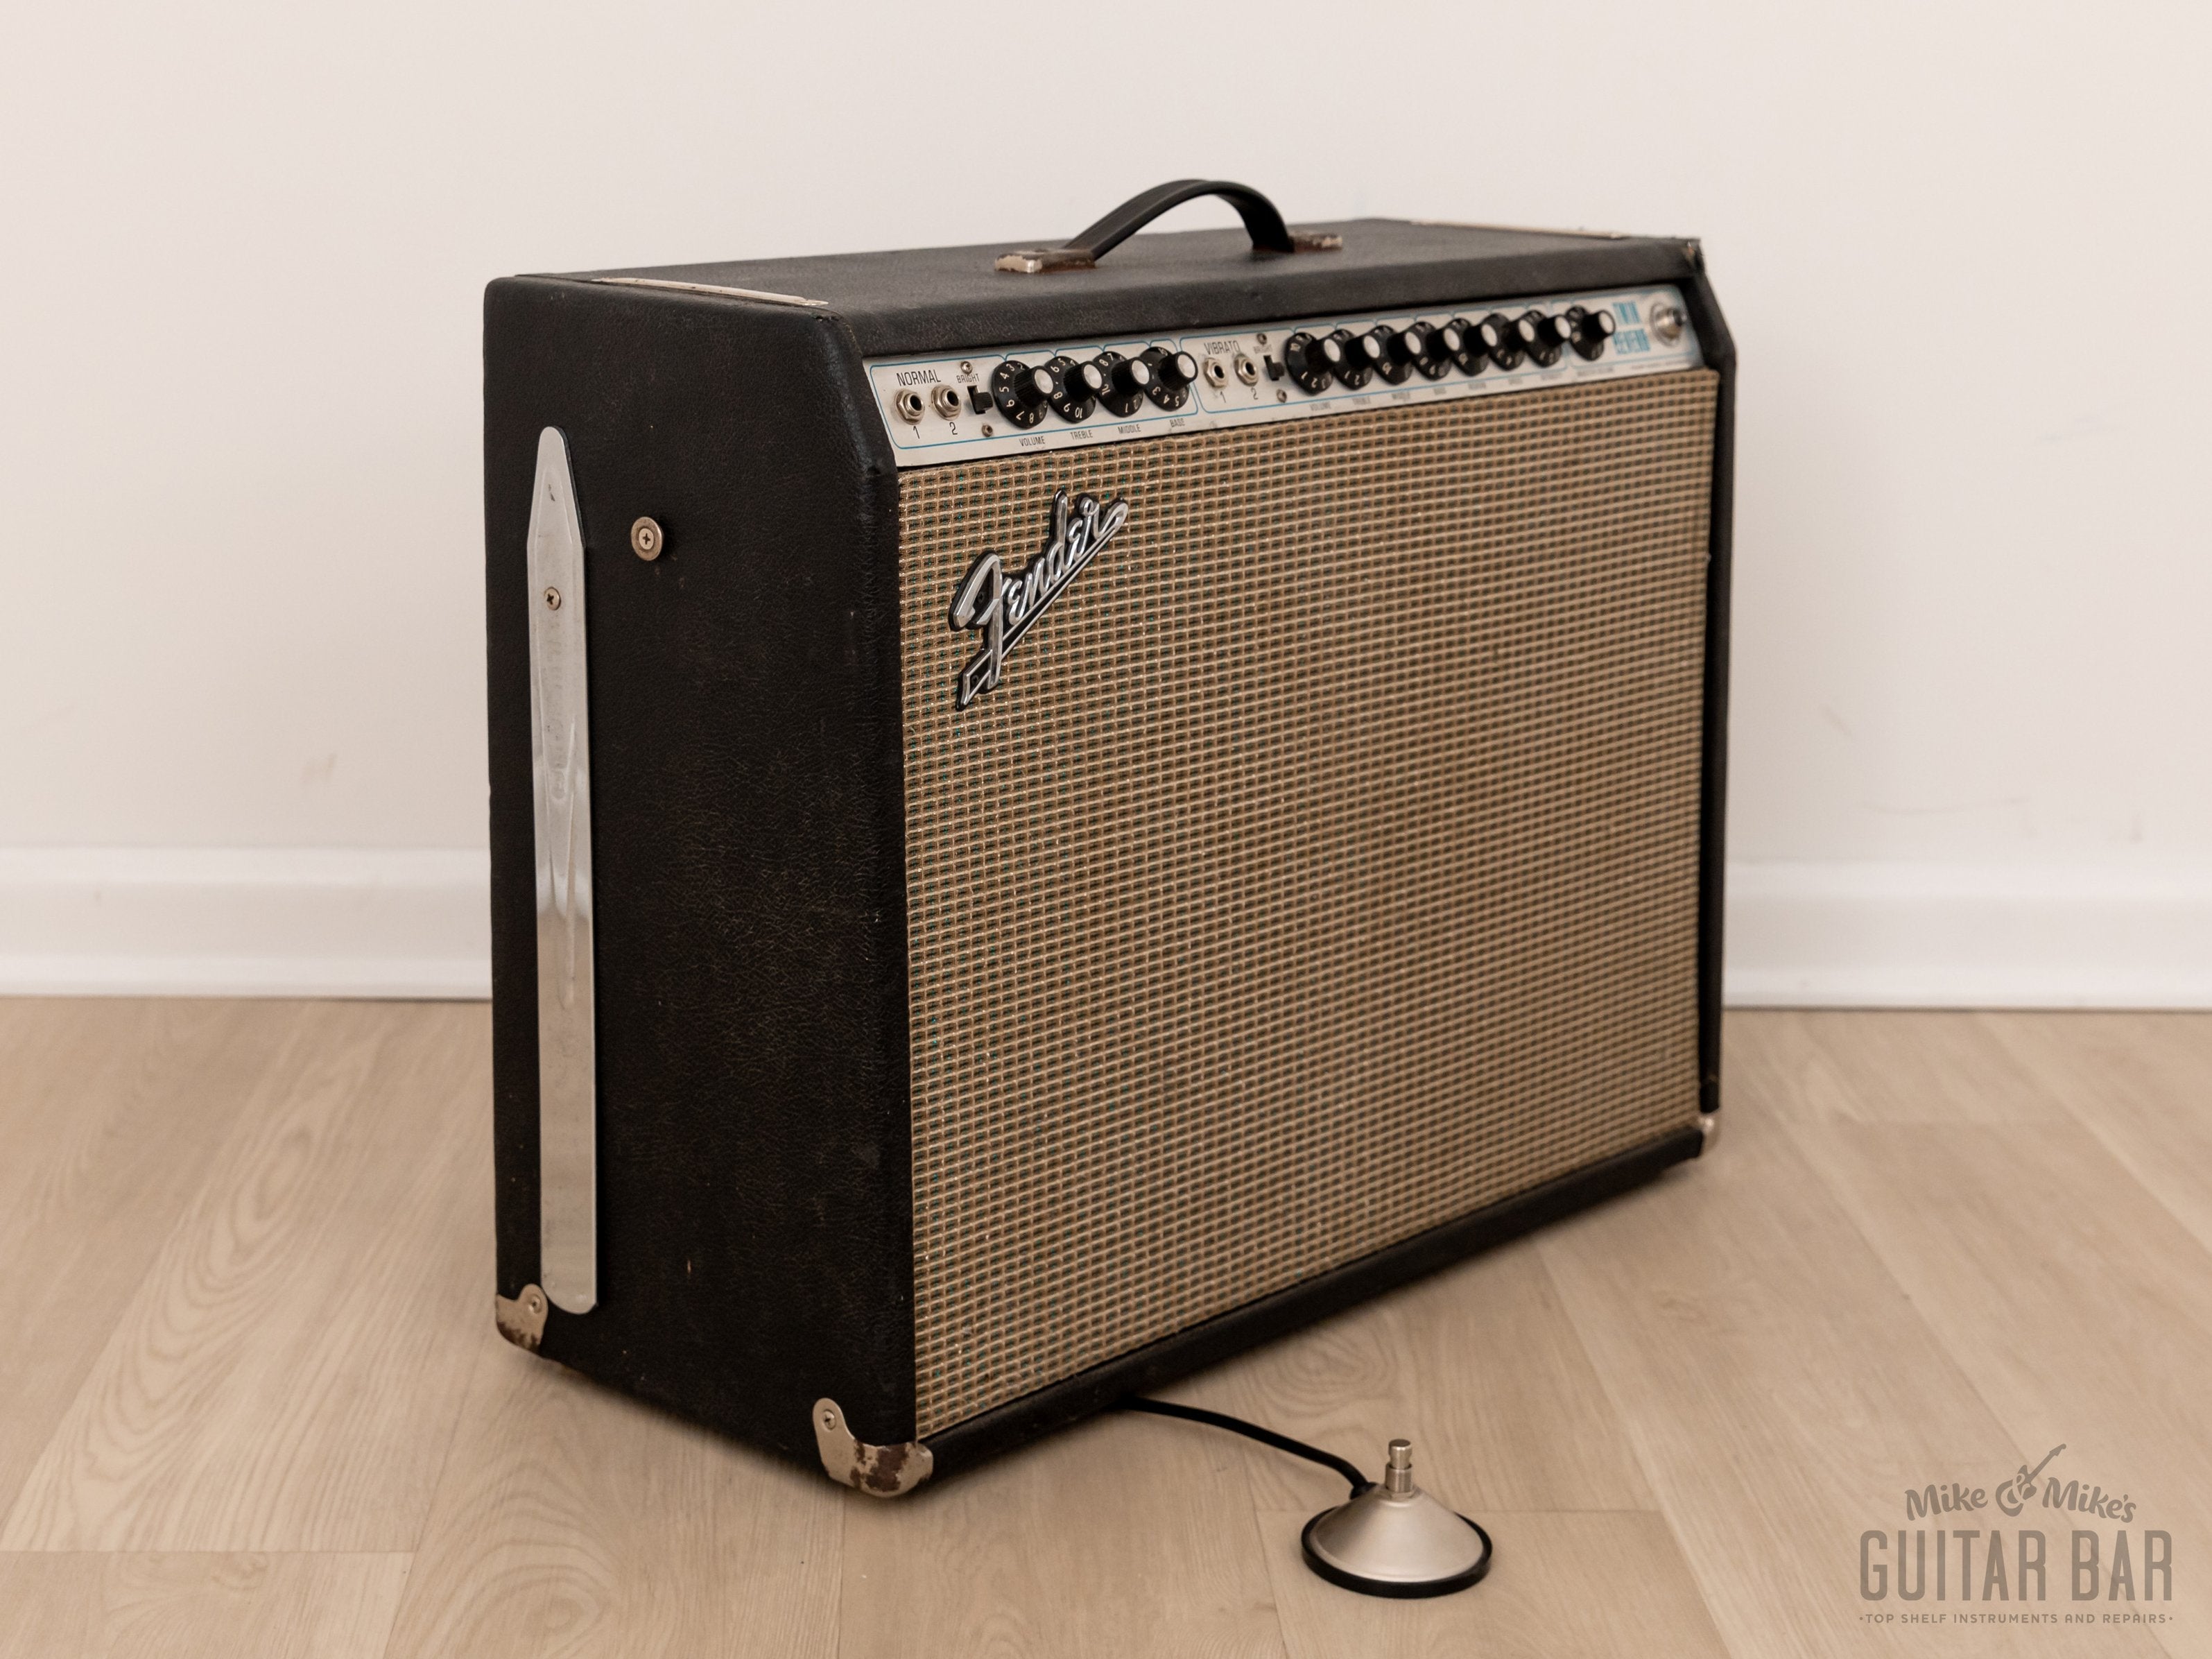 1972 Fender Twin Reverb Silverface Vintage Tube Amp 2x12, Serviced w/ Ftsw